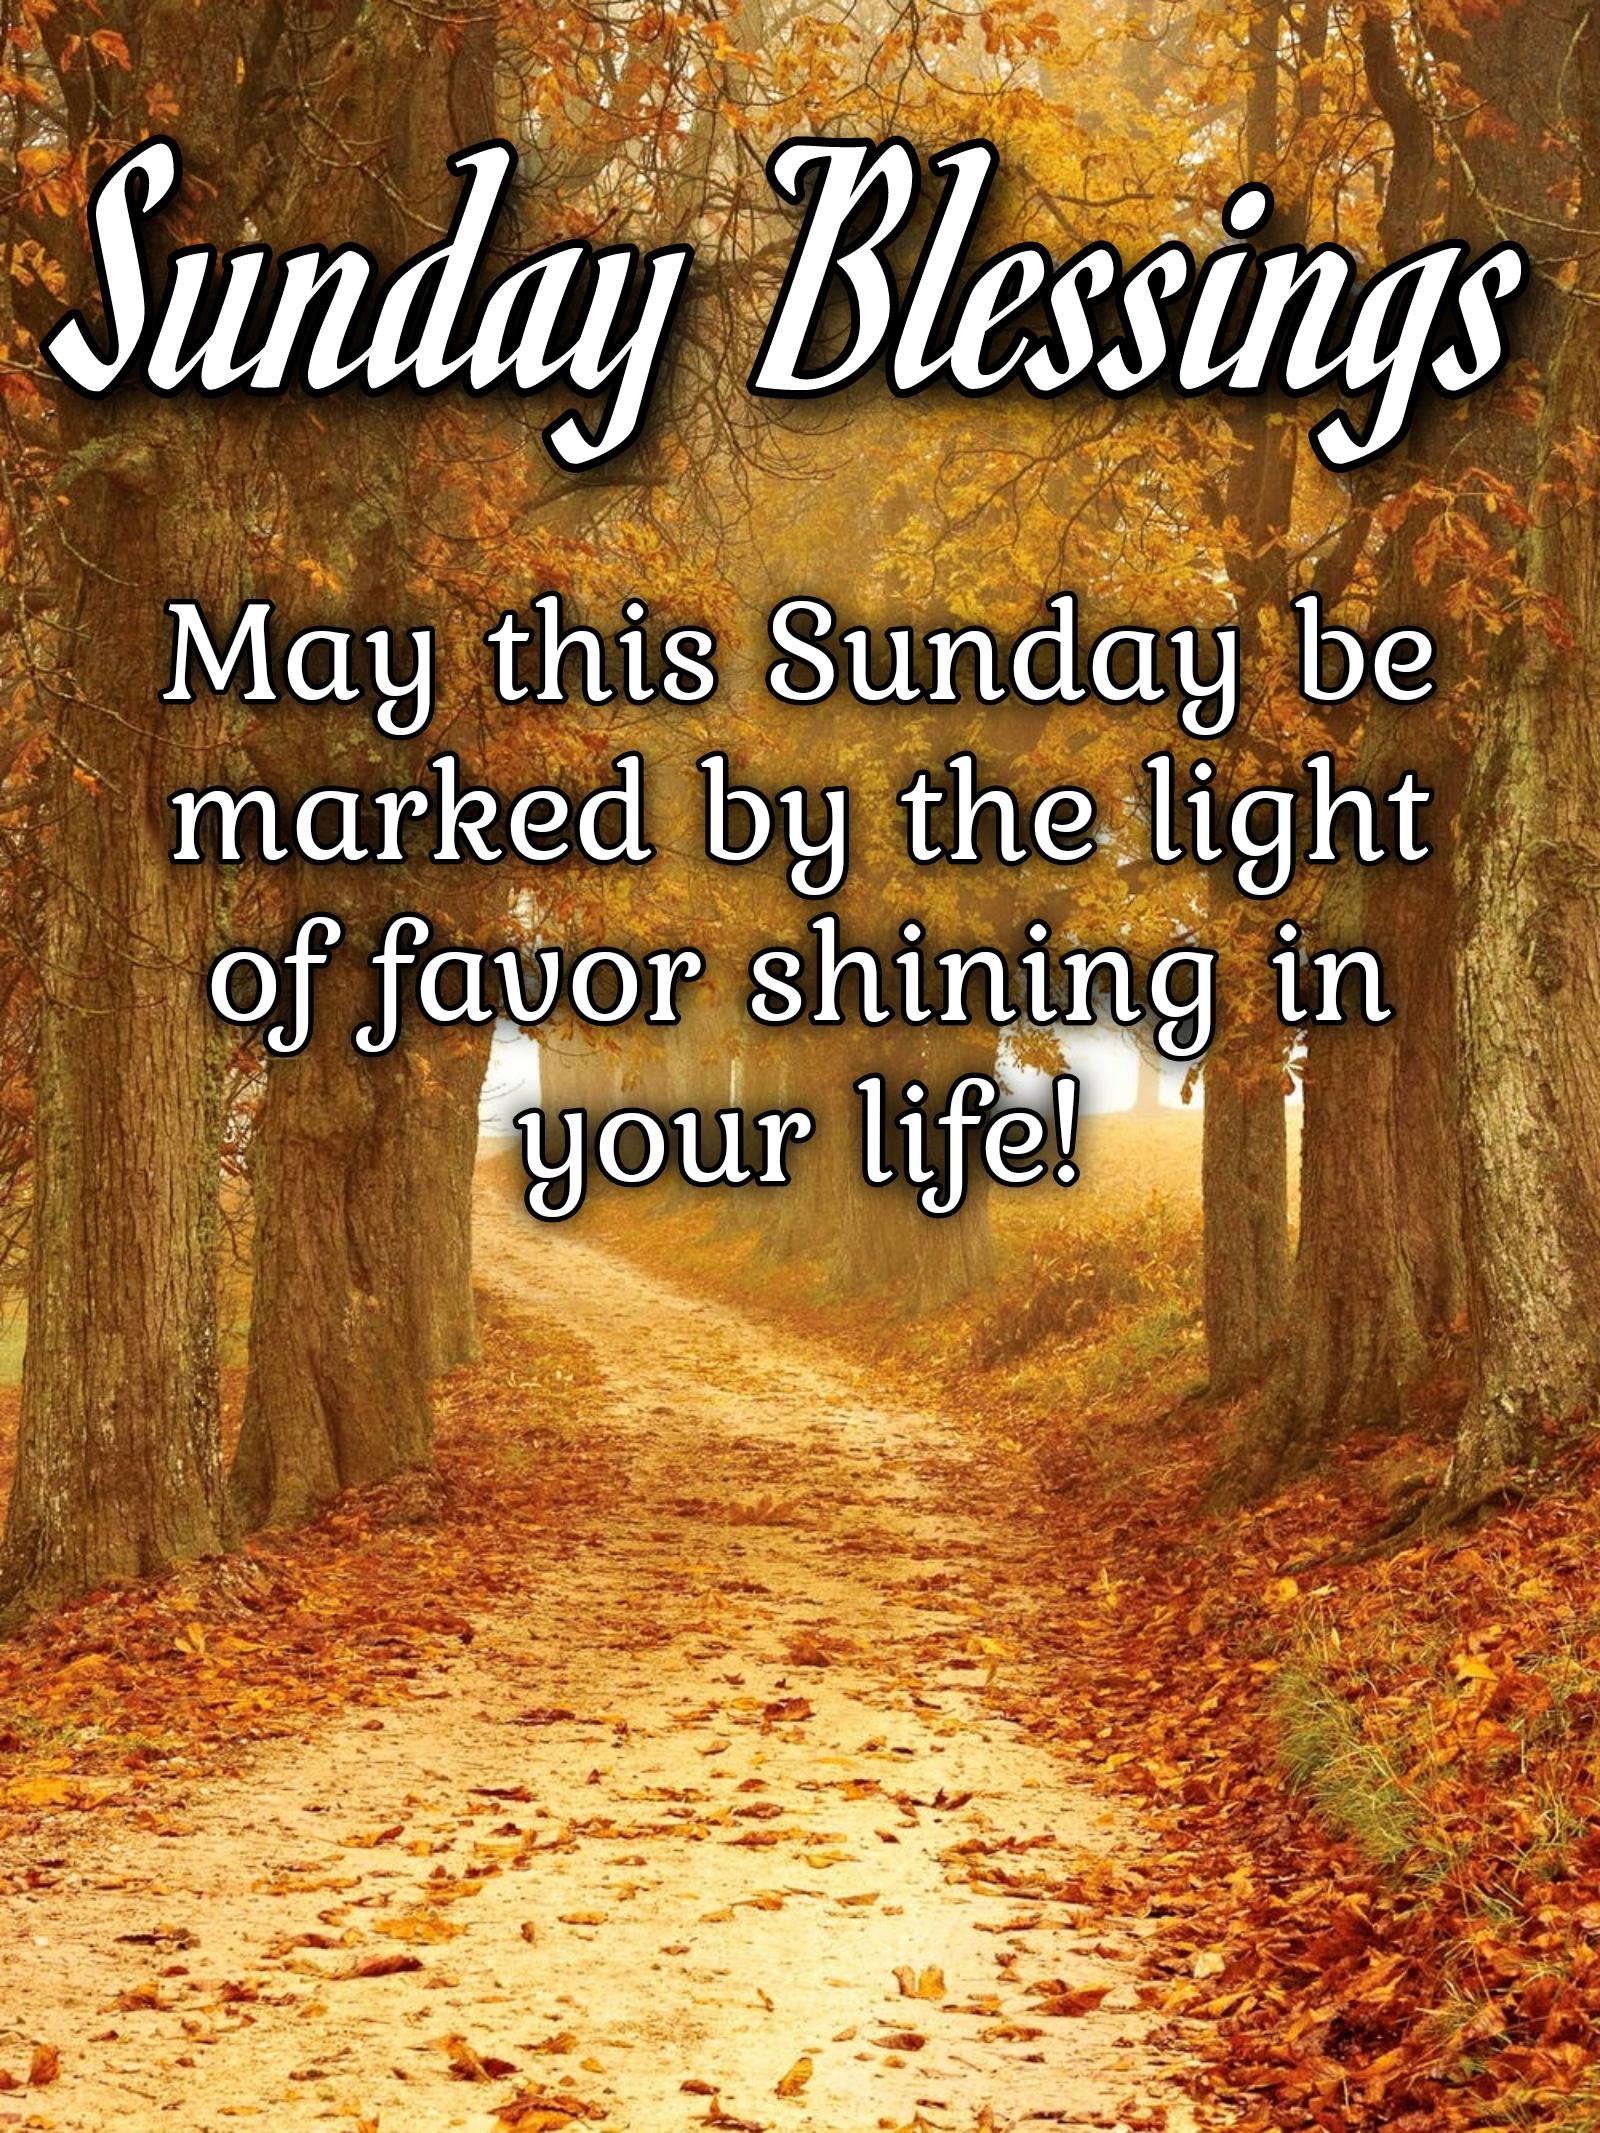 May this Sunday be marked by the light of favor shining in your life!